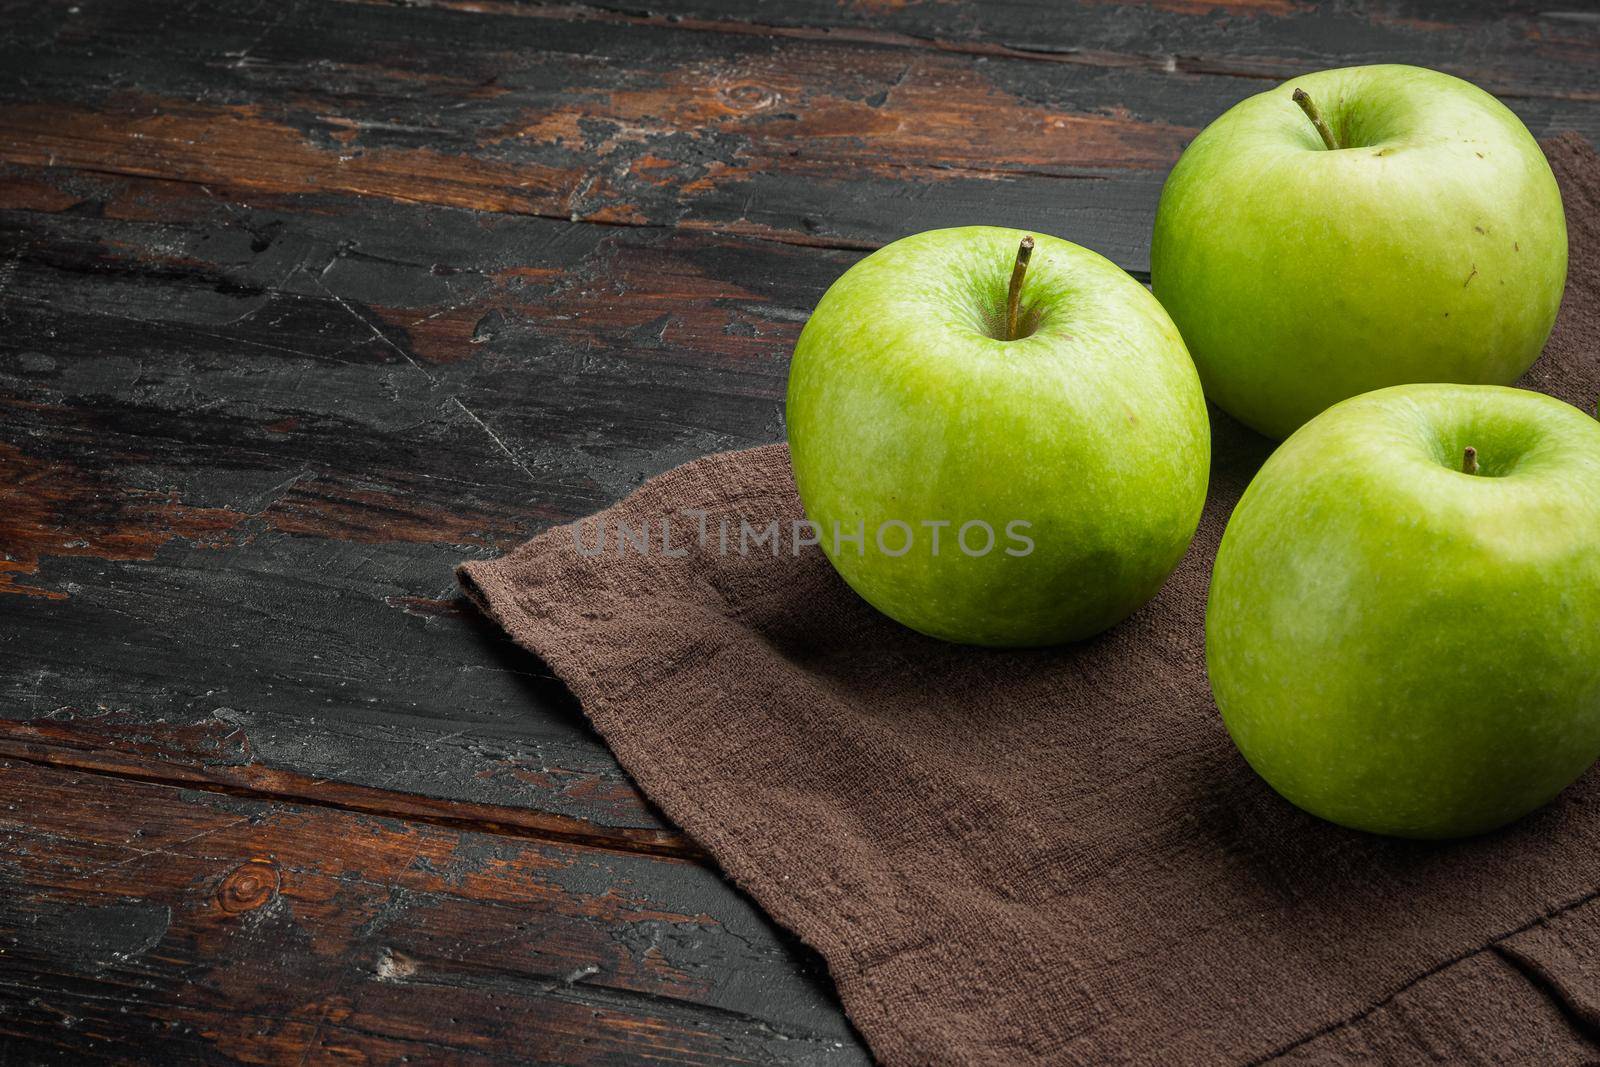 Several ripe green apples, on old dark rustic table background, with copy space for text by Ilianesolenyi